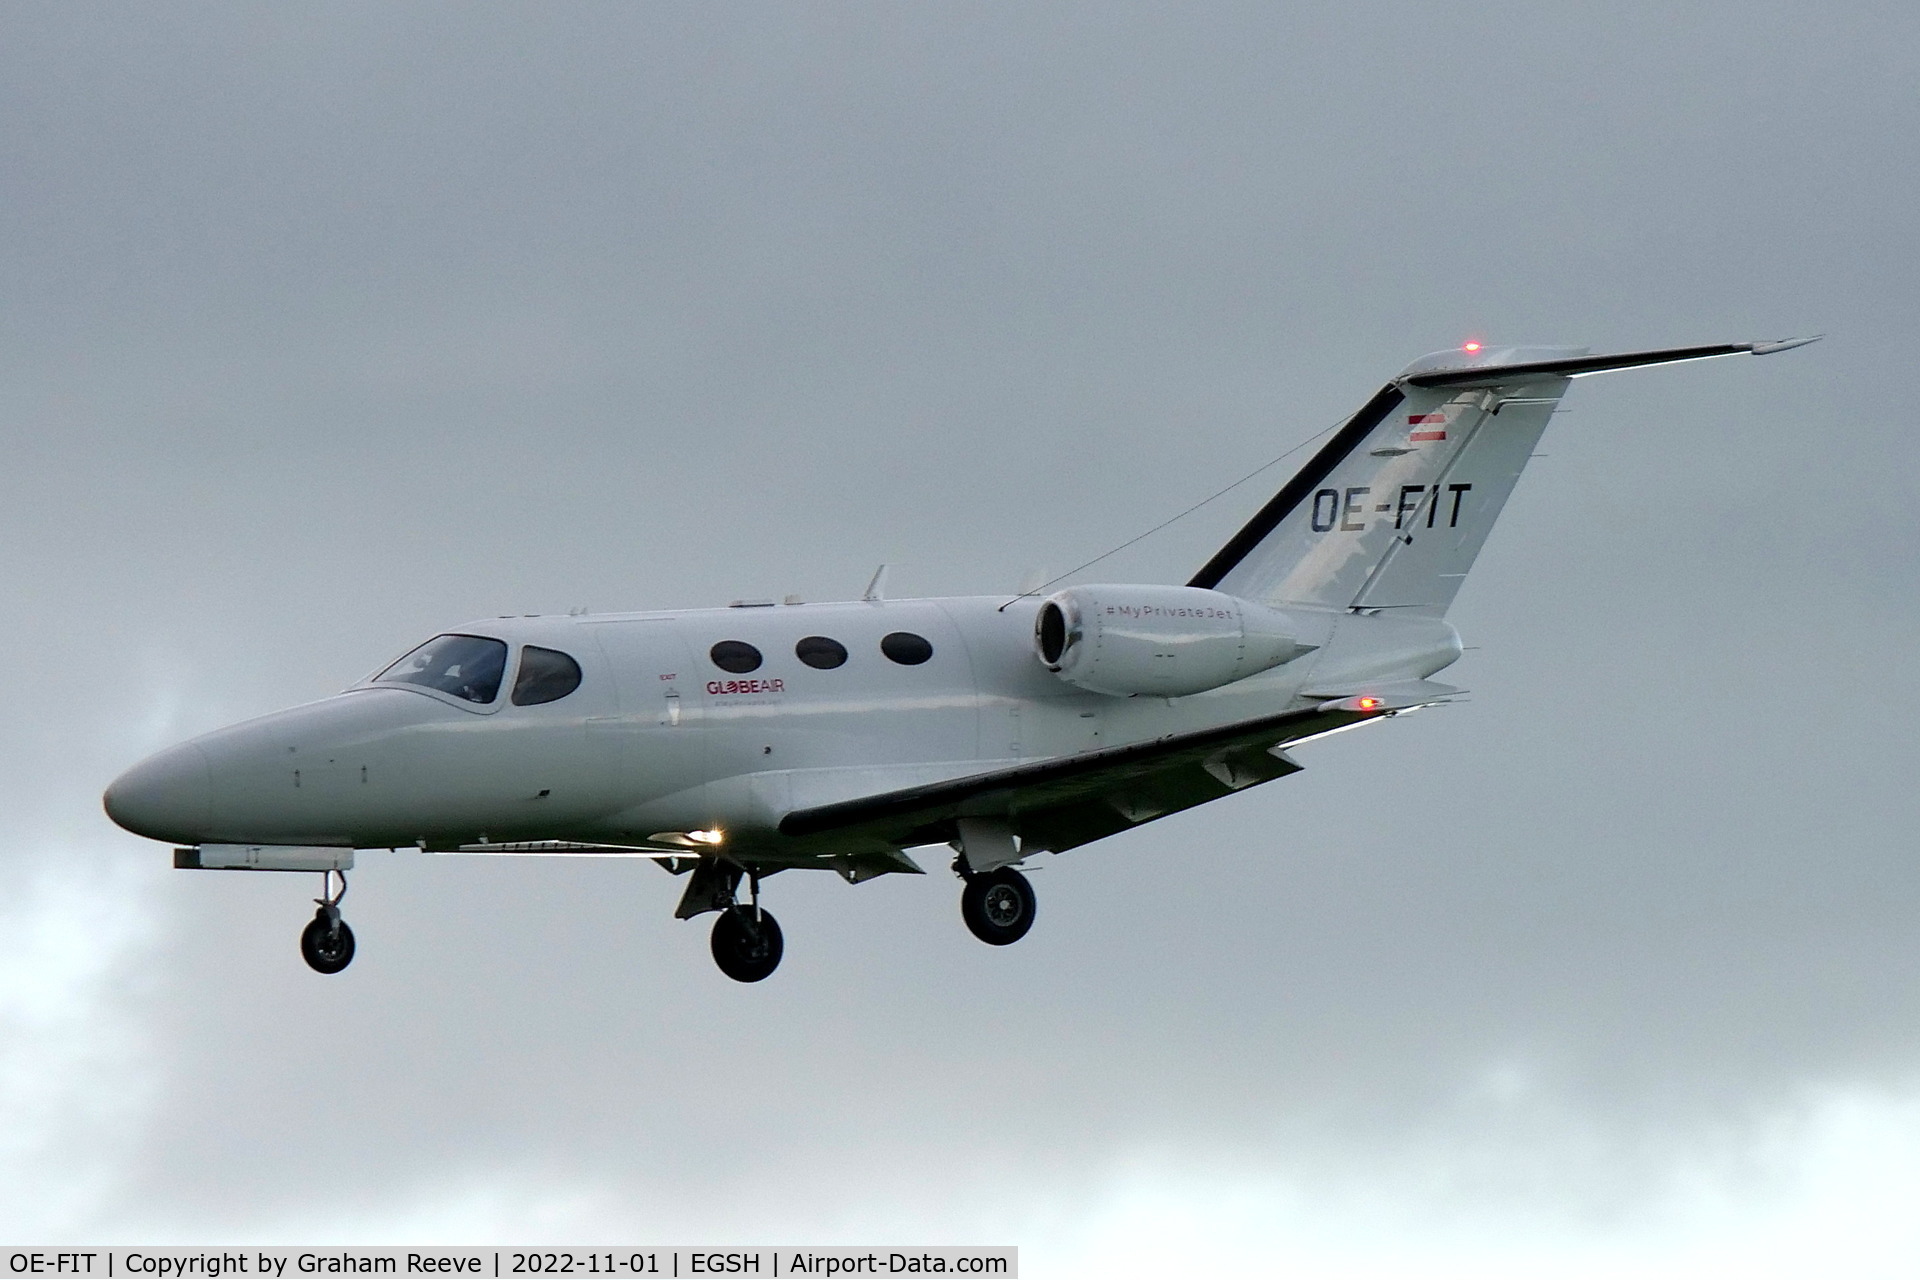 OE-FIT, 2010 Cessna 510 Citation Mustang Citation Mustang C/N 510-0319, Landing at Norwich.